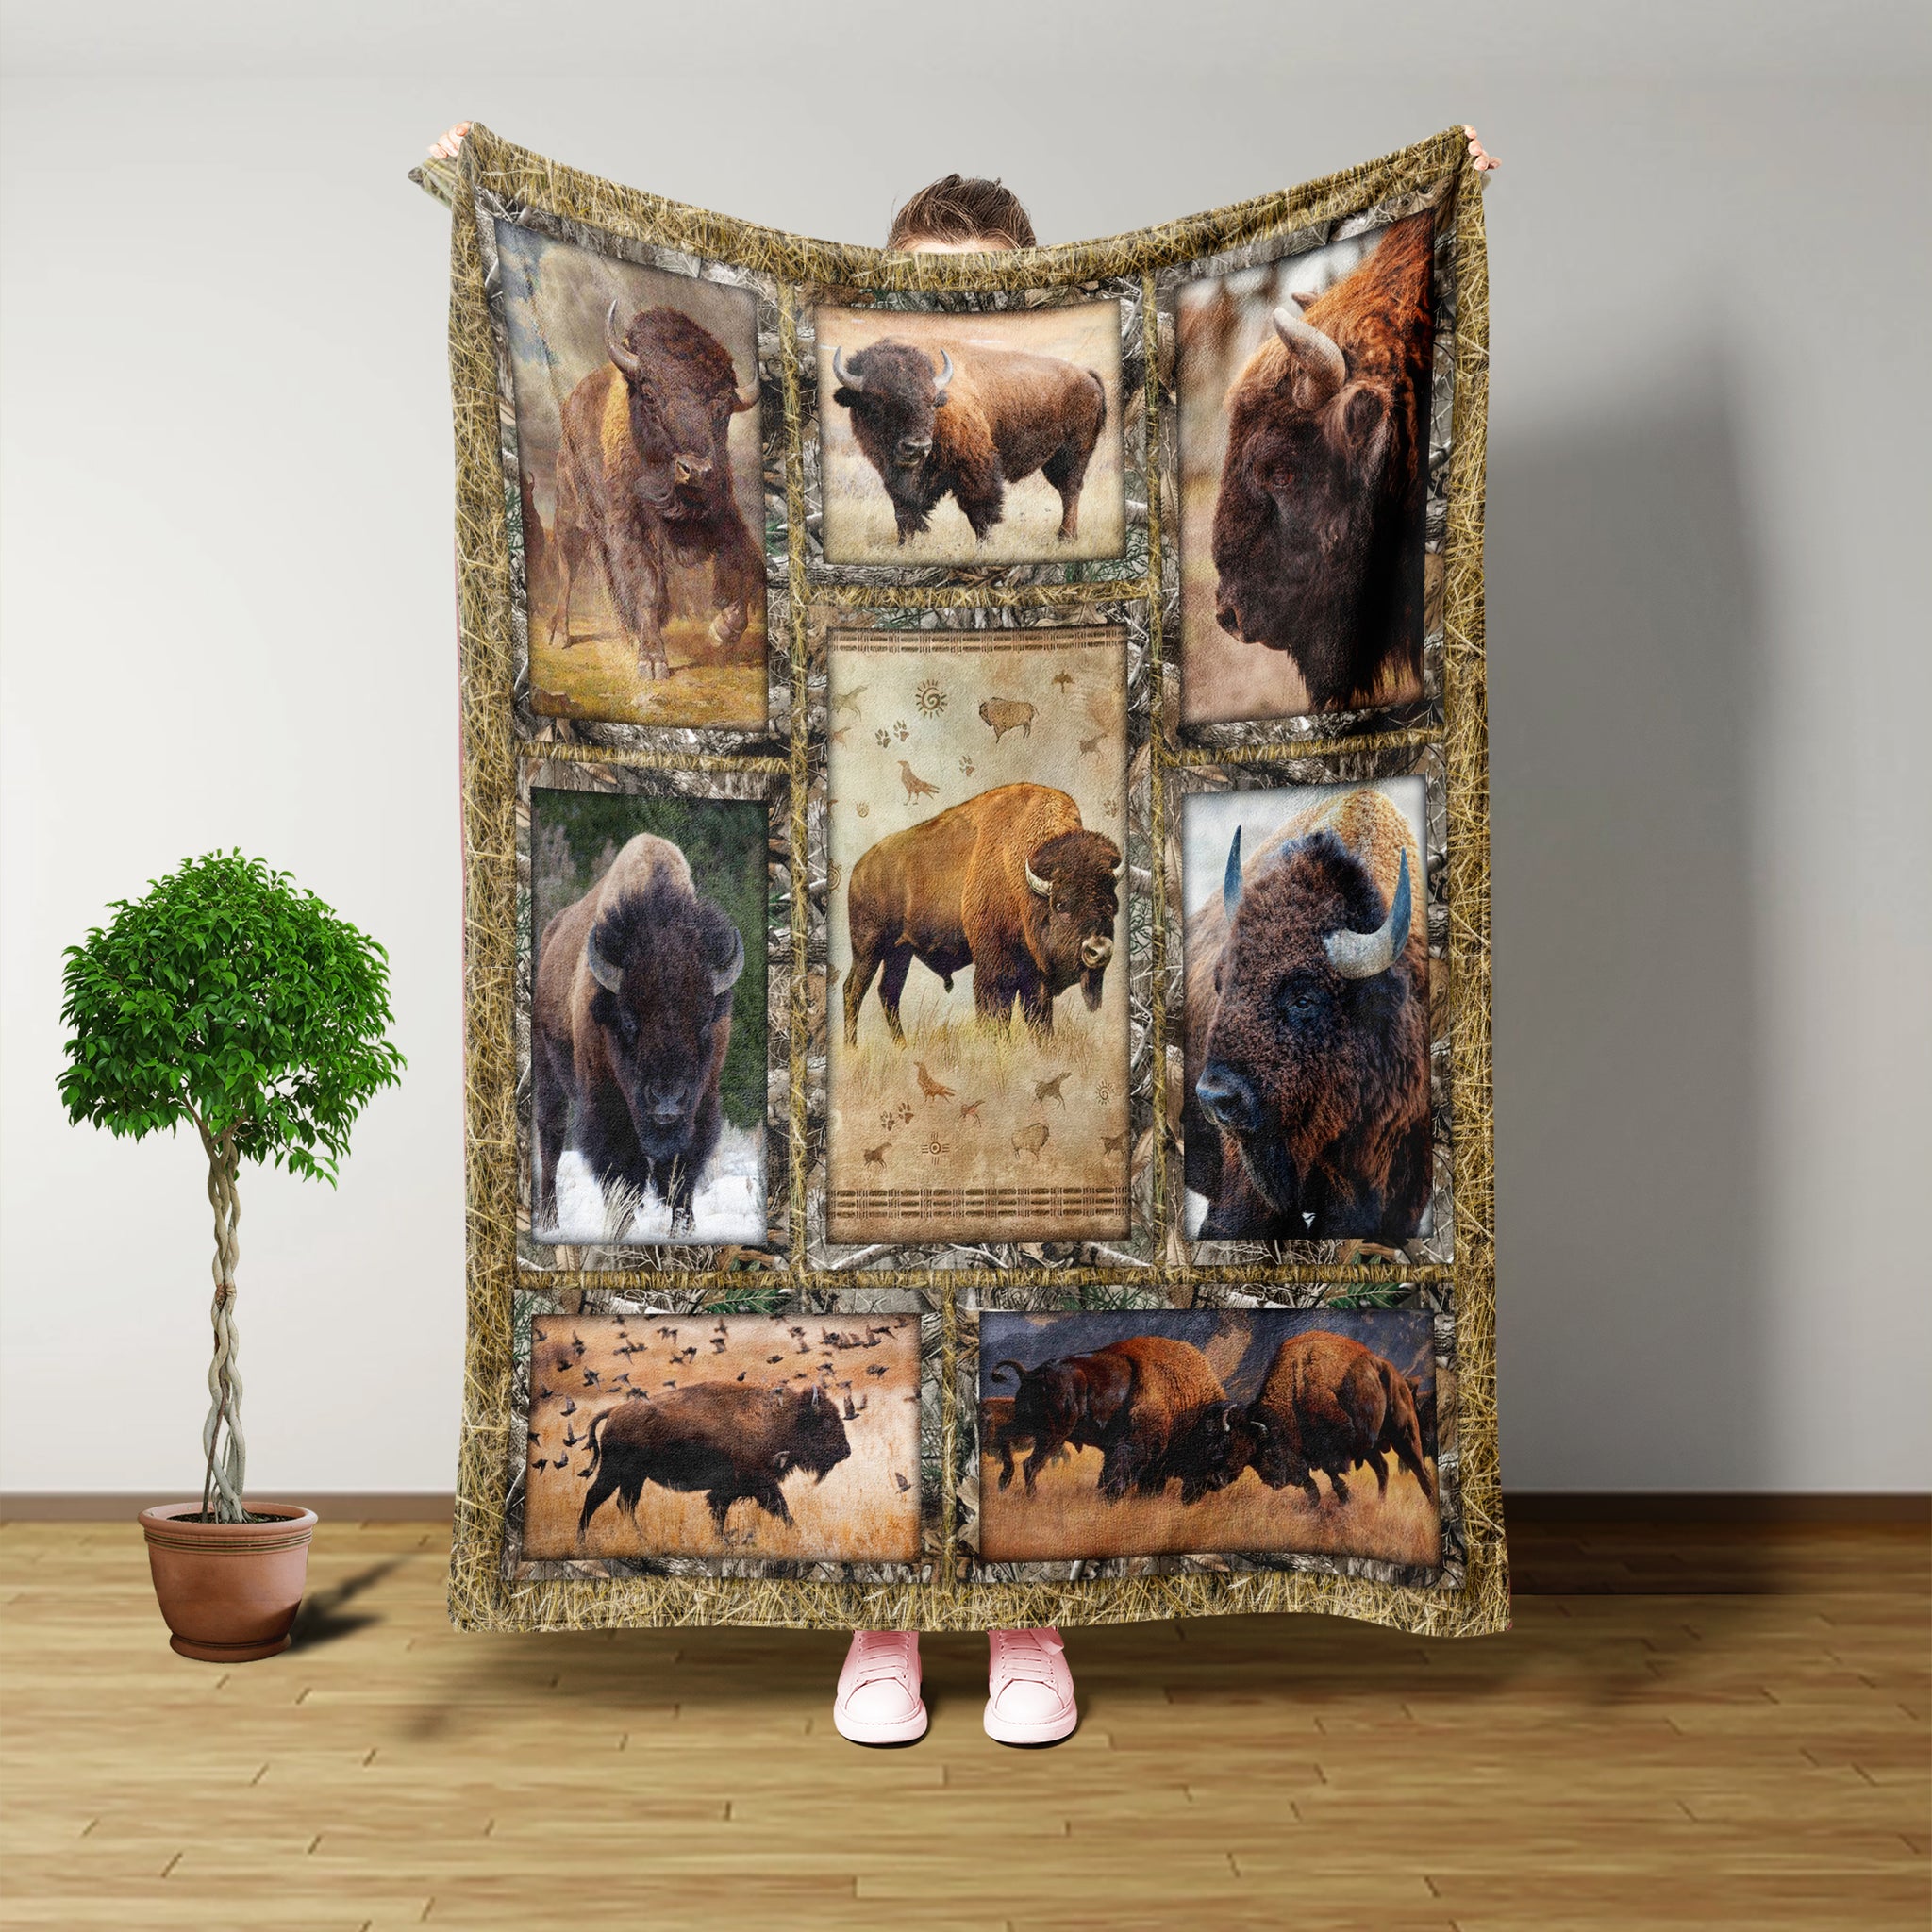 Animal Blanket, American Bison, Wild Life, Birthday Gifts For Men, Husband Gifts, Fall Throw Blanket